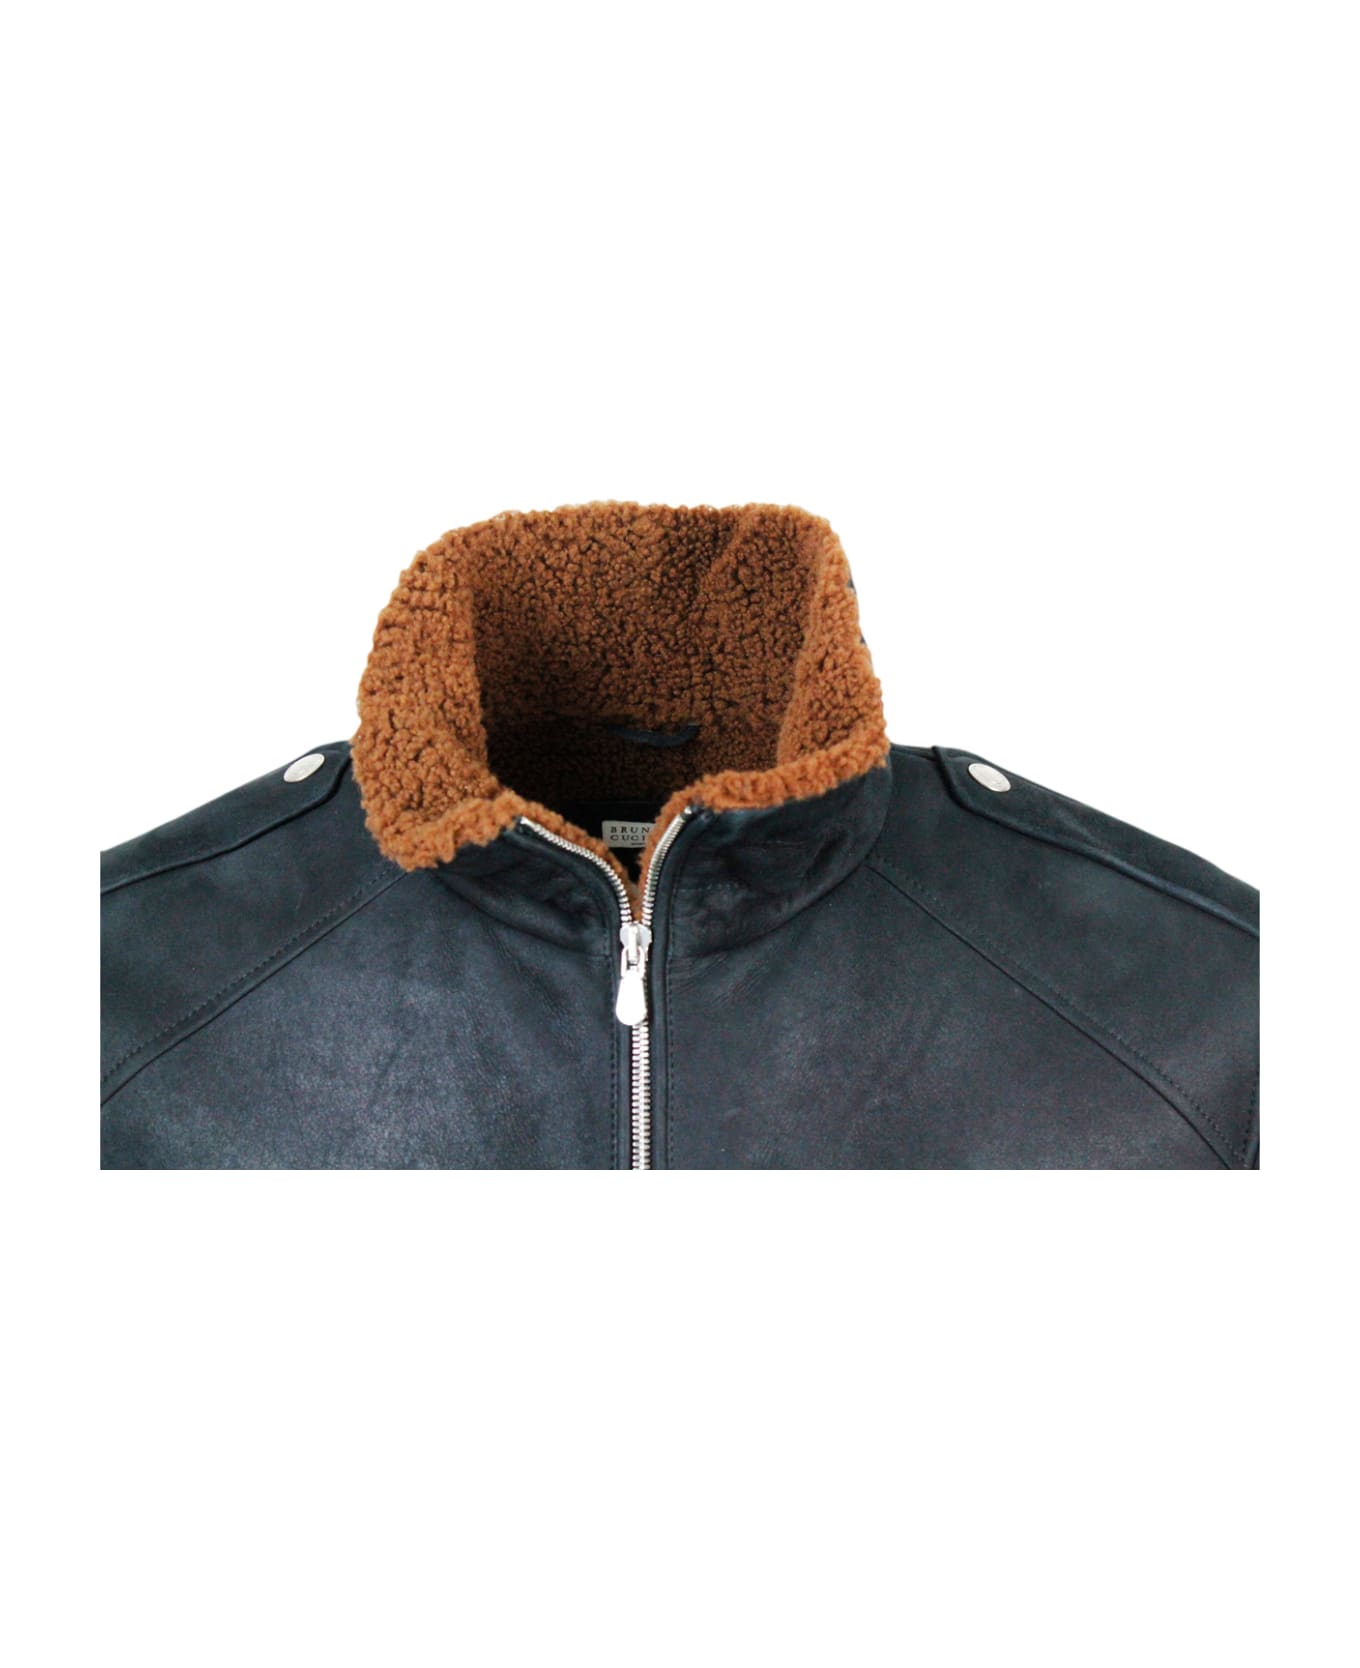 Brunello Cucinelli Suede Shearling Bomber Jacket With Zip Closure And Knitted Cuffs And Bottom - Brown